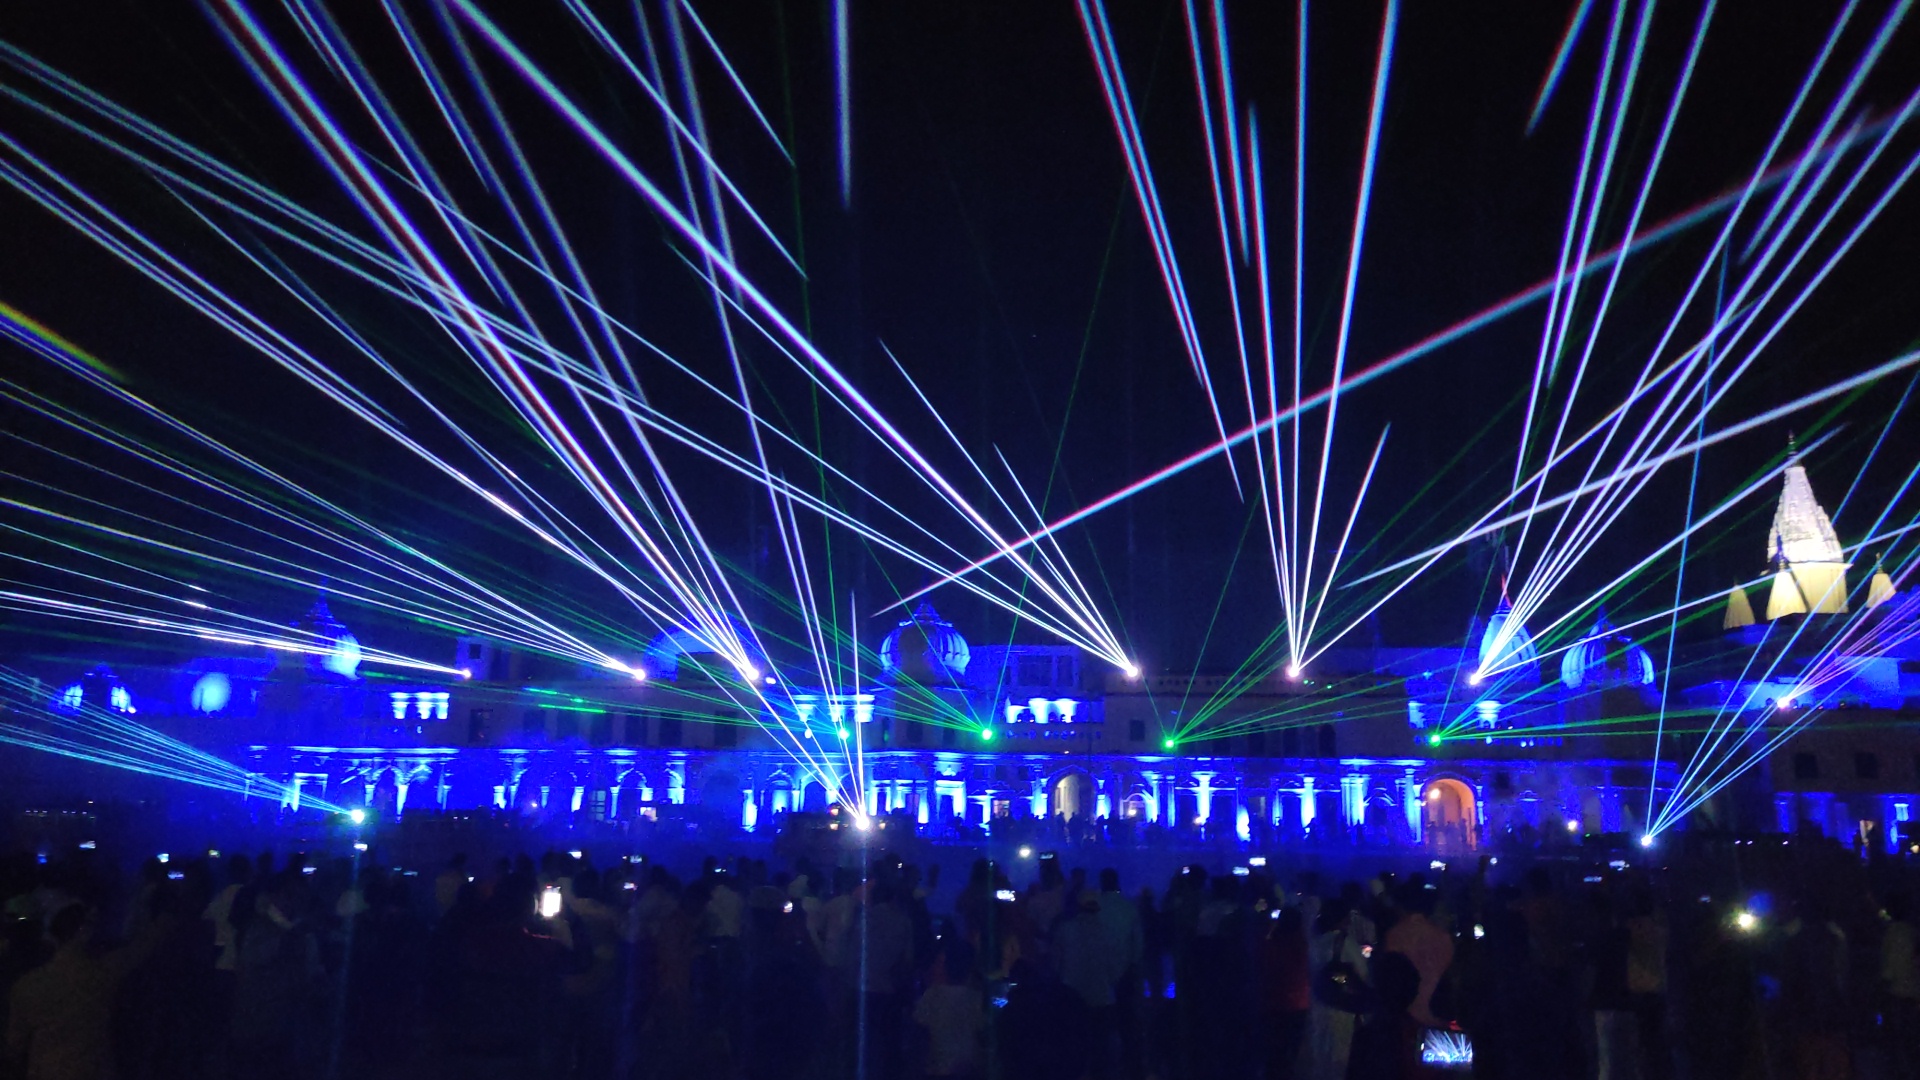 ayodhya lit up with colorful laser lights